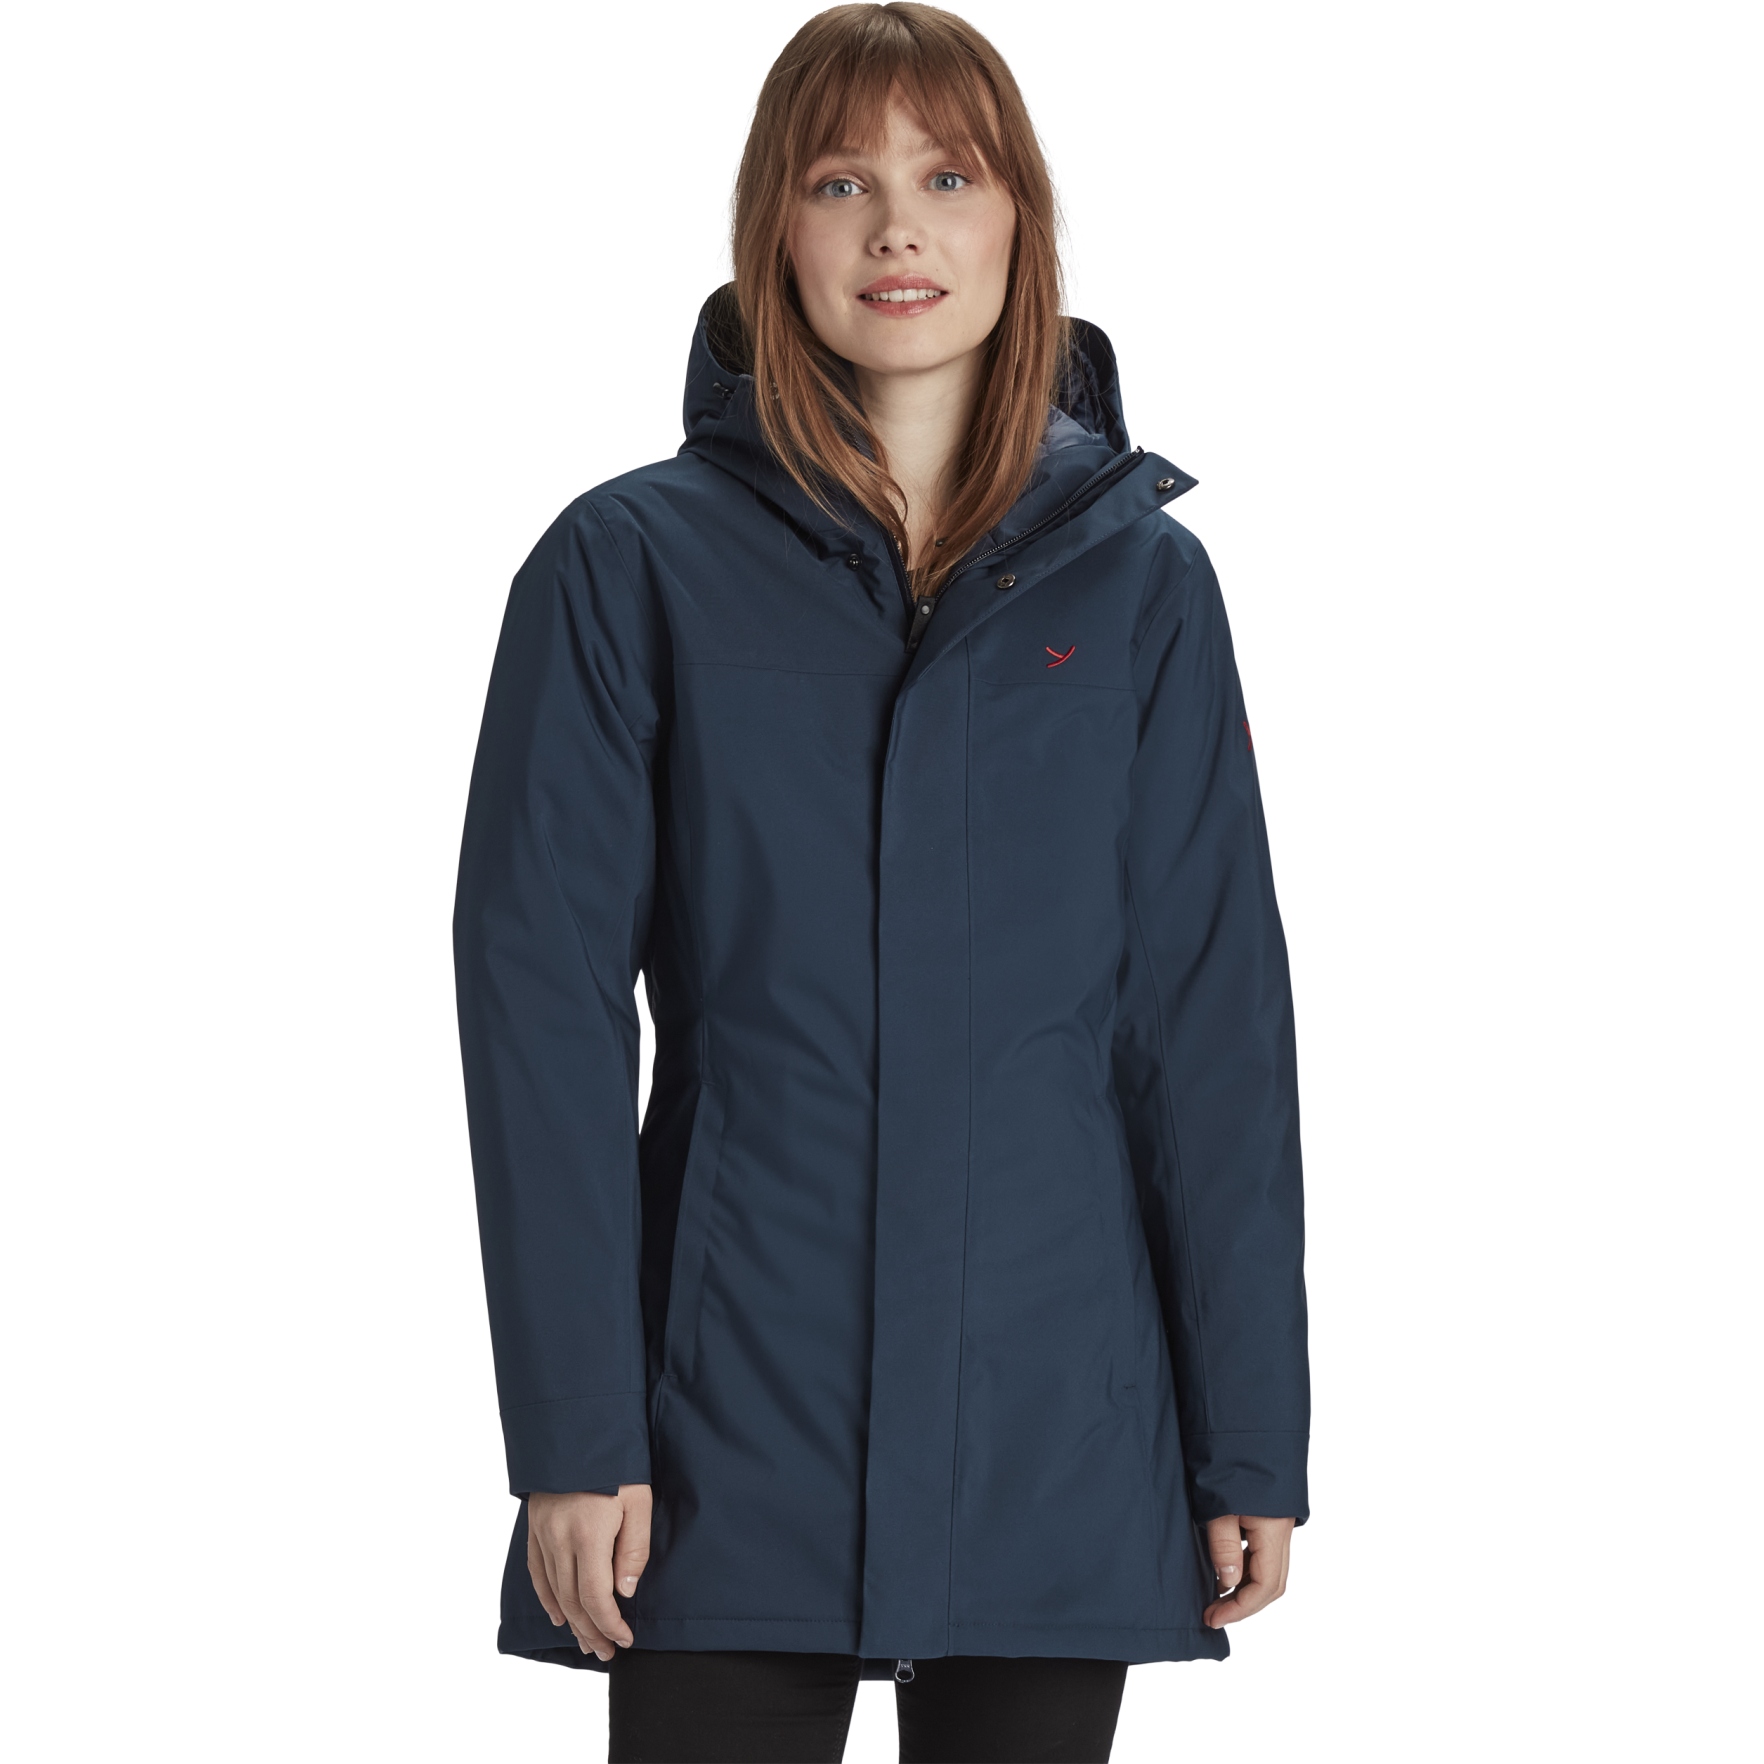 Image of Y by Nordisk Mani Down Coat Women - dress blue